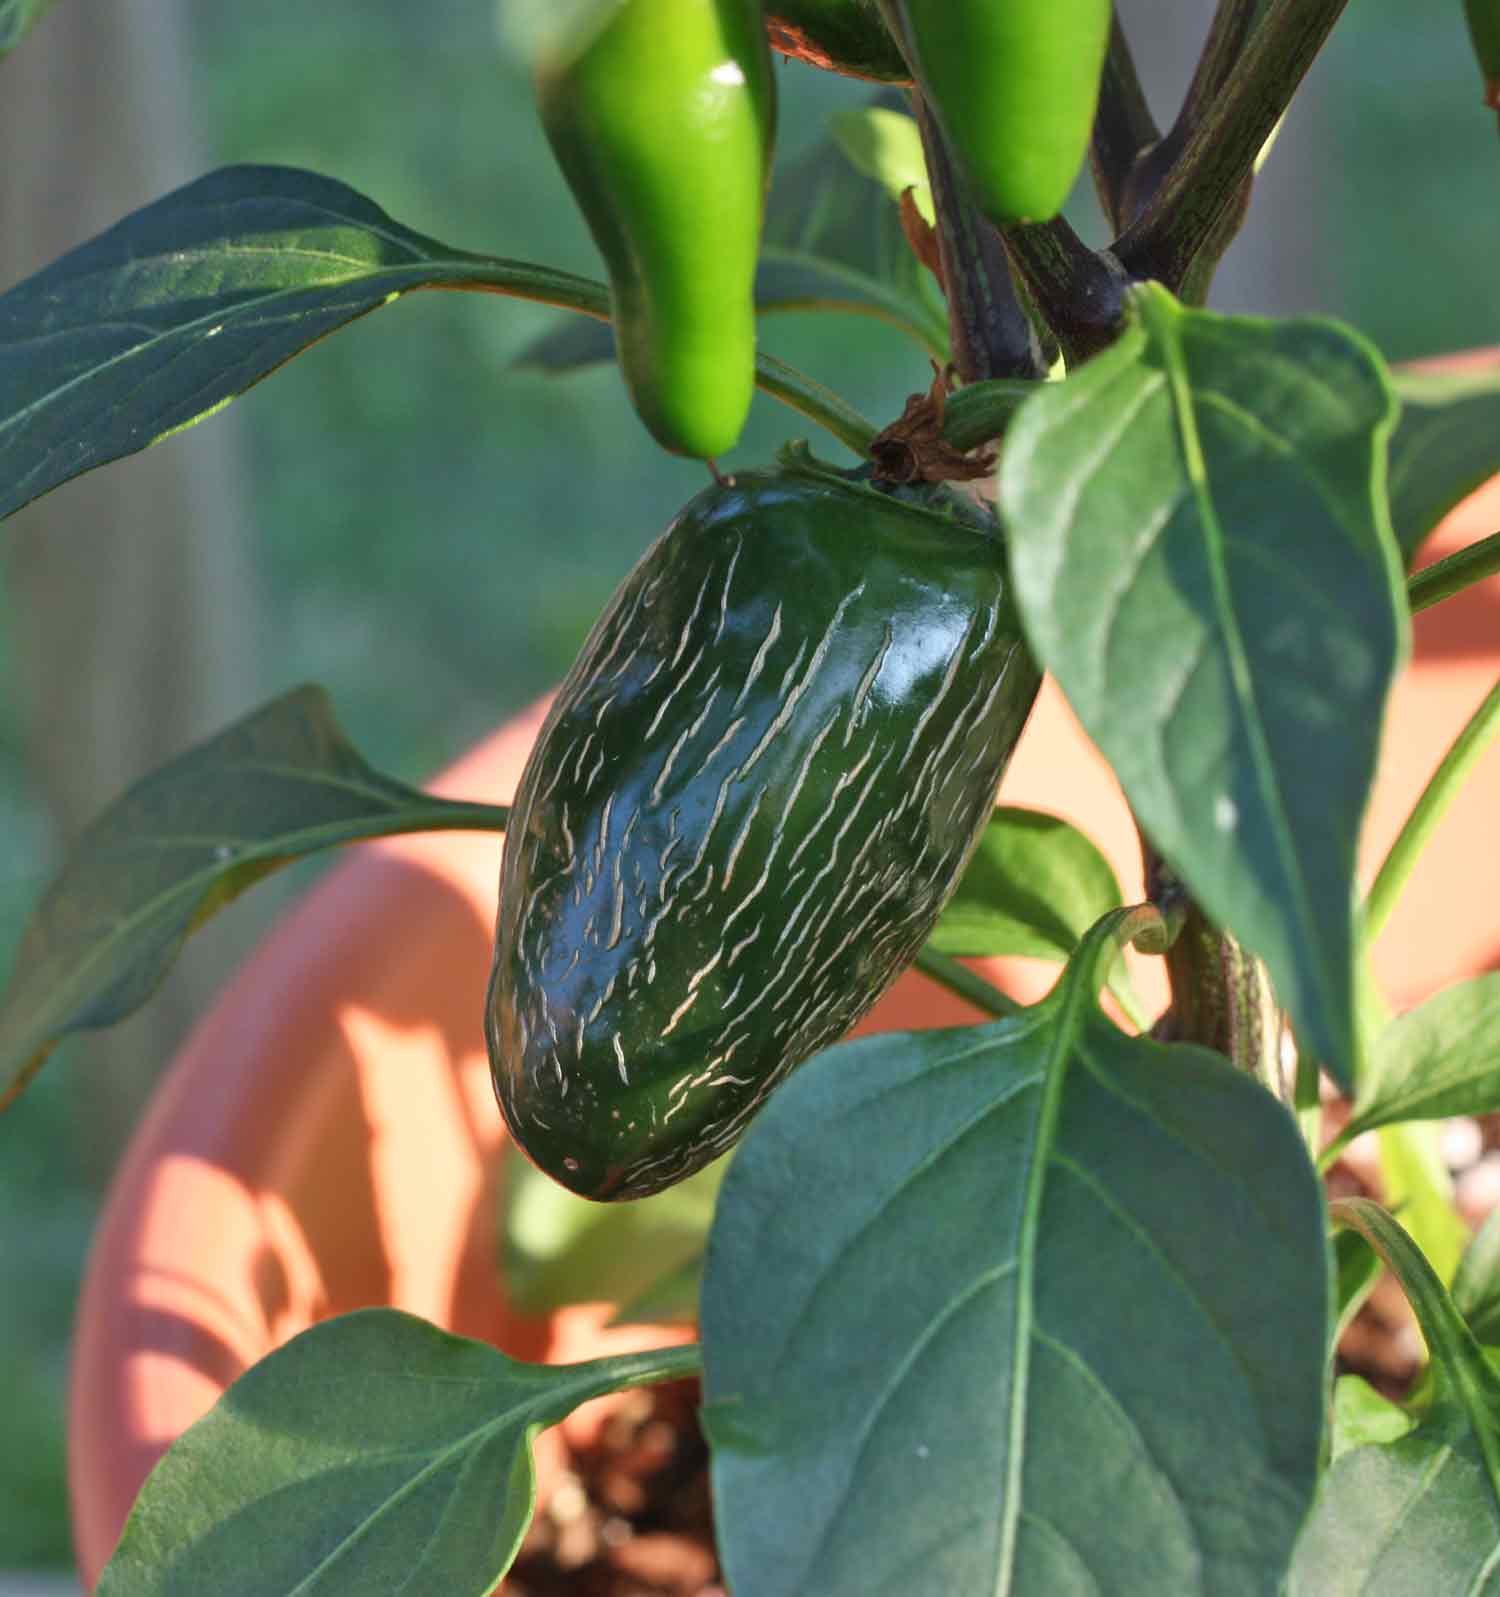 Green jalapeno pepper with striations.